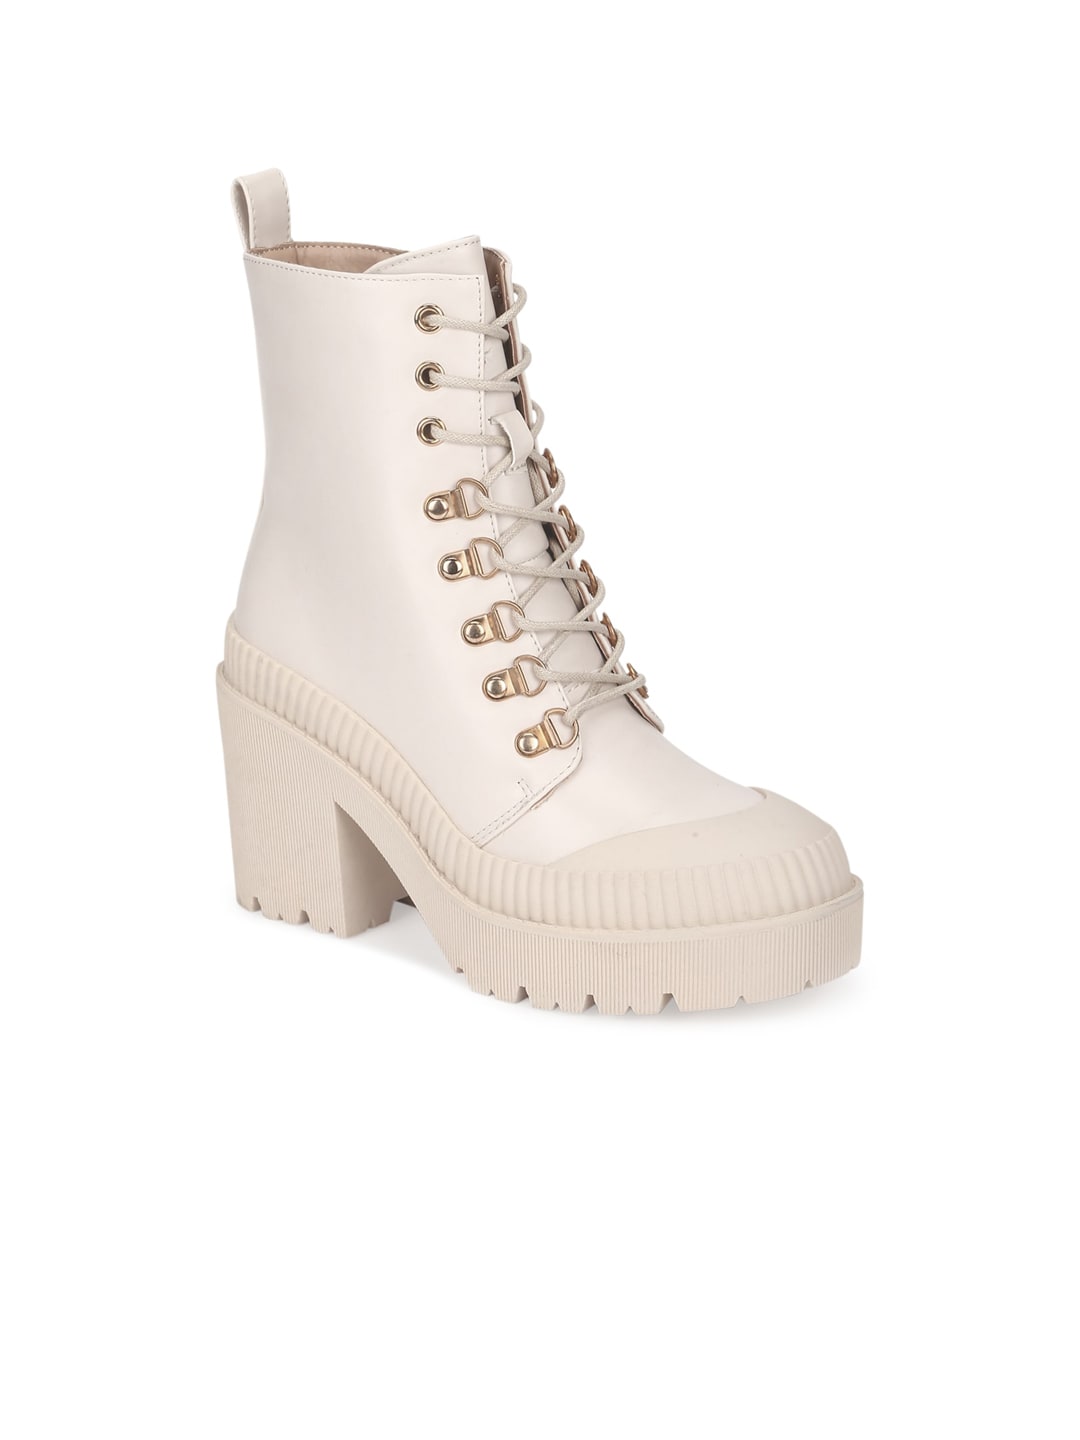 Truffle Collection Beige Solid High-Top Block Heeled Boots Price in India